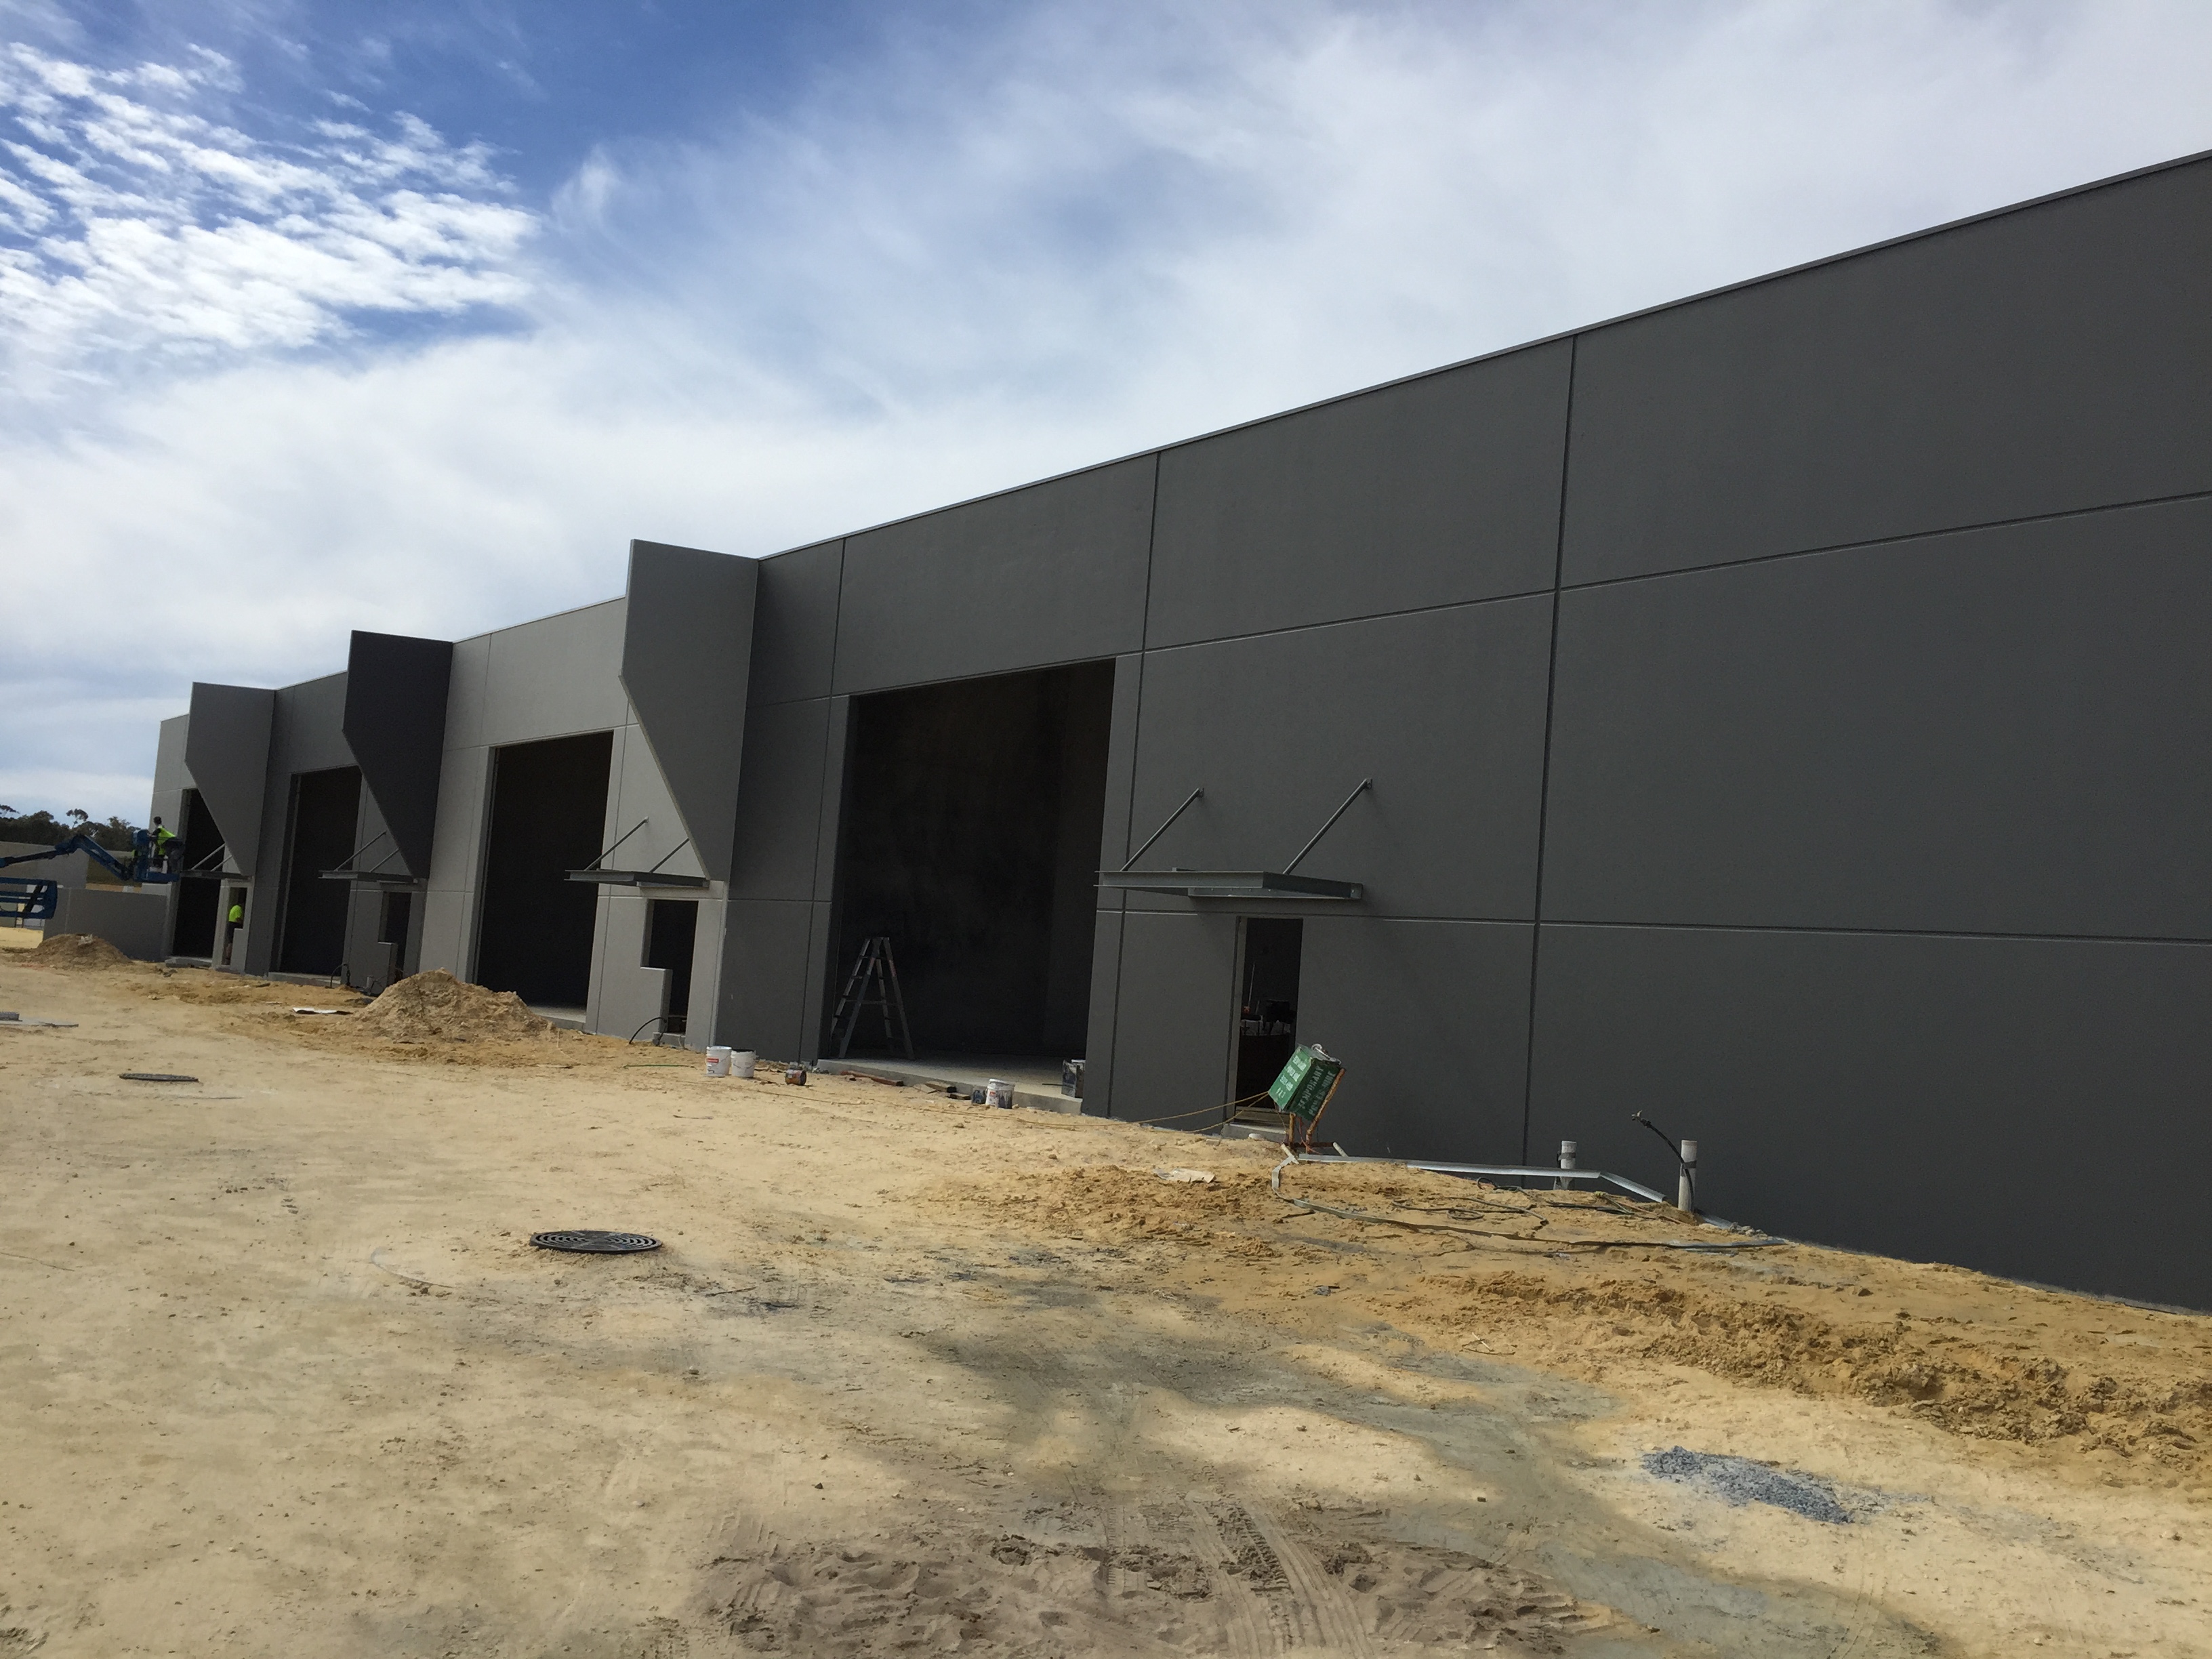 Exterior shot of large commercial building painted in dark grey